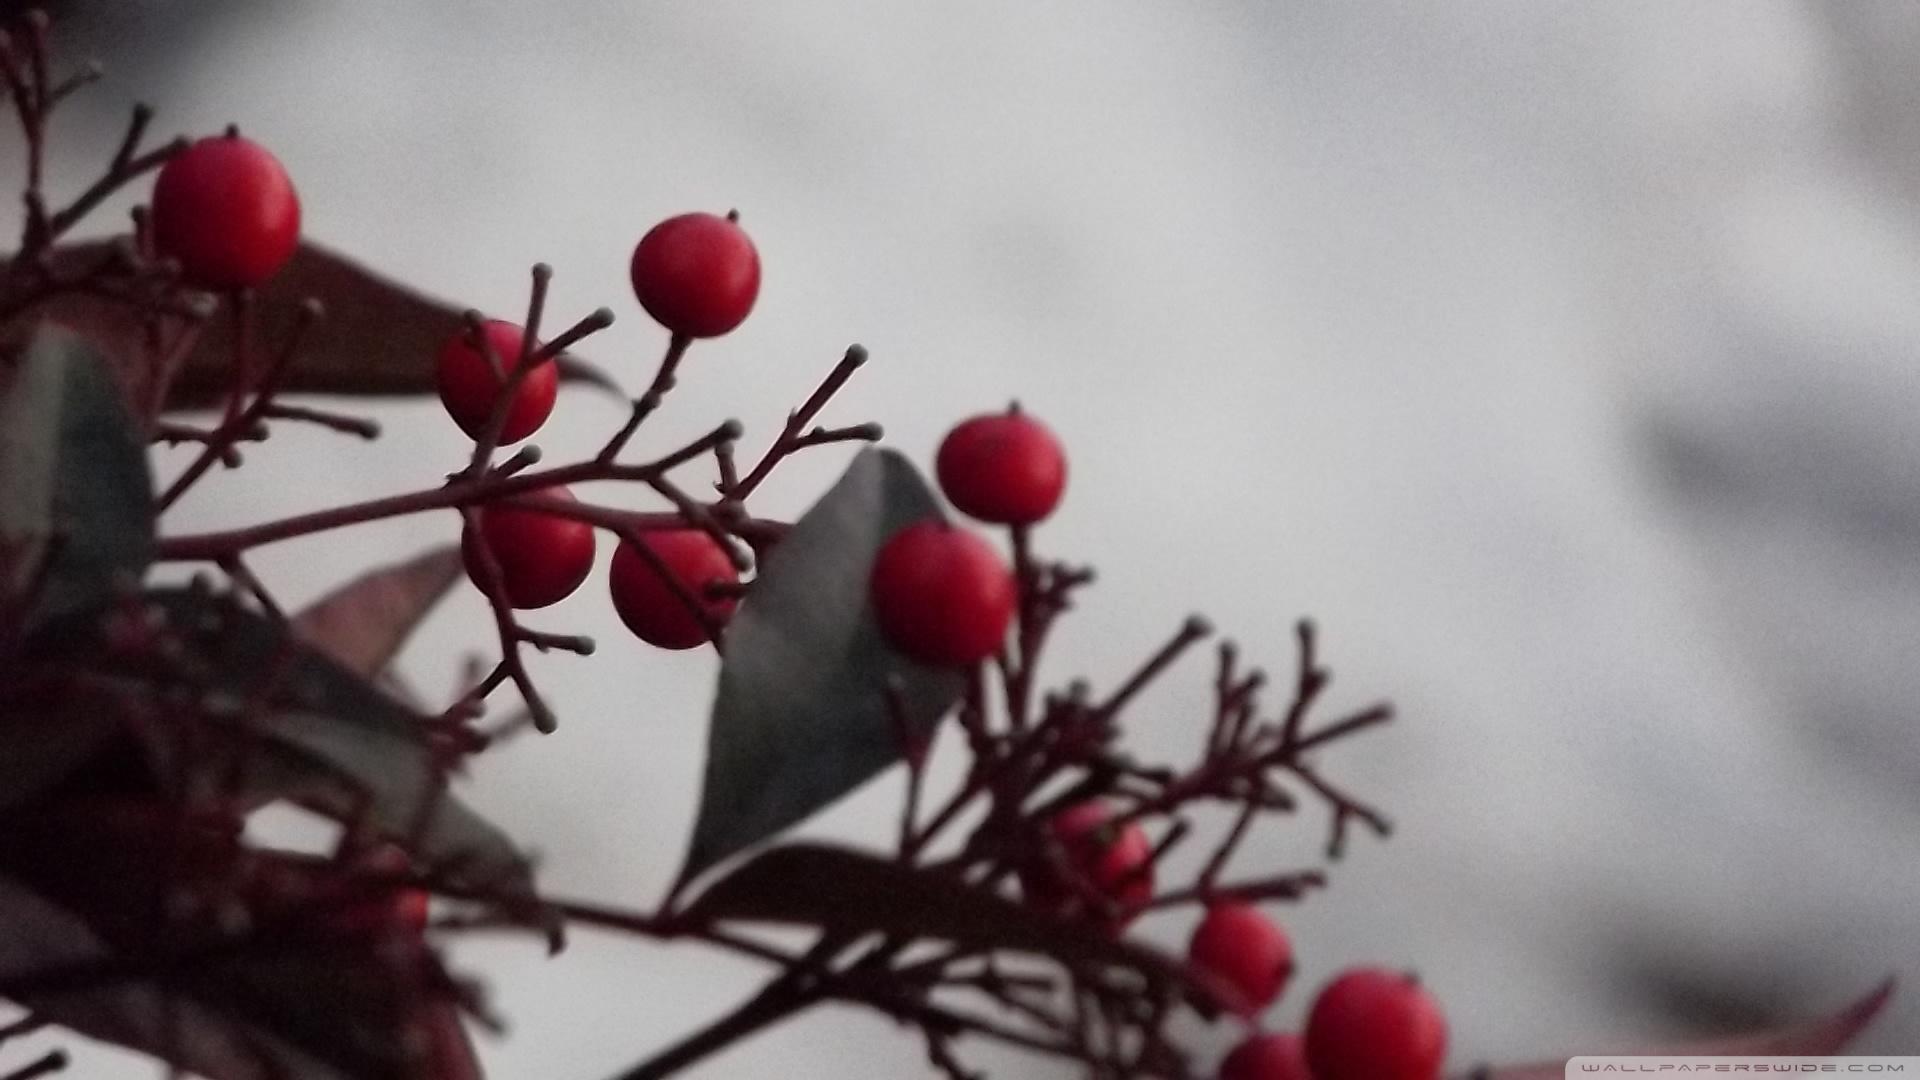 Winter Berries High Quality And Resolution Wallpaper On